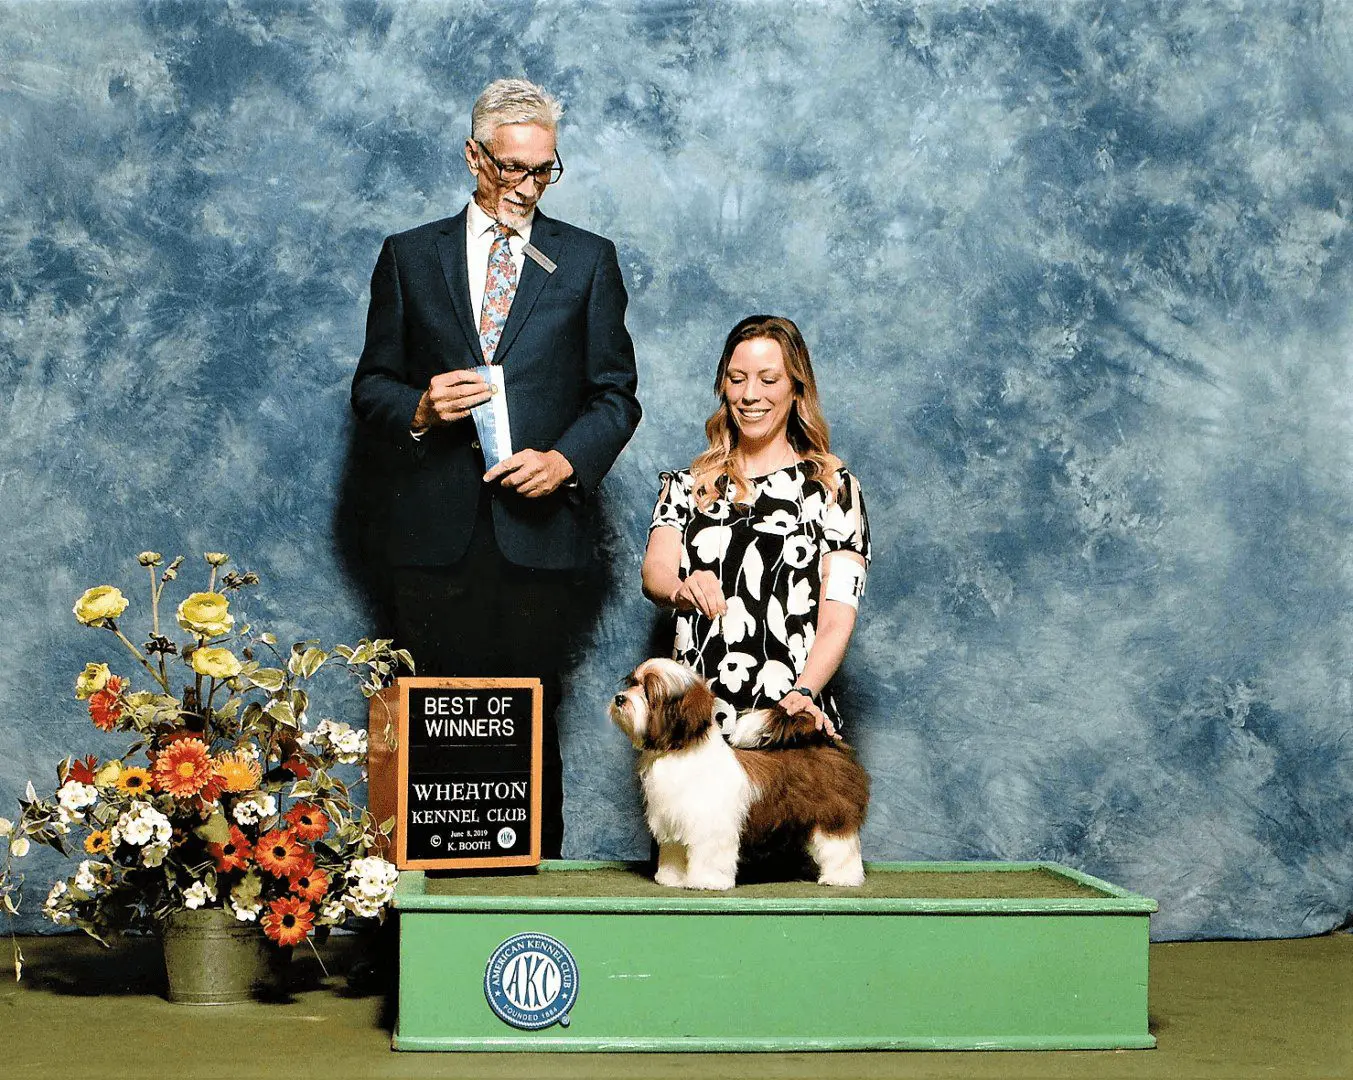 A man and woman posing with a Havanese dog.